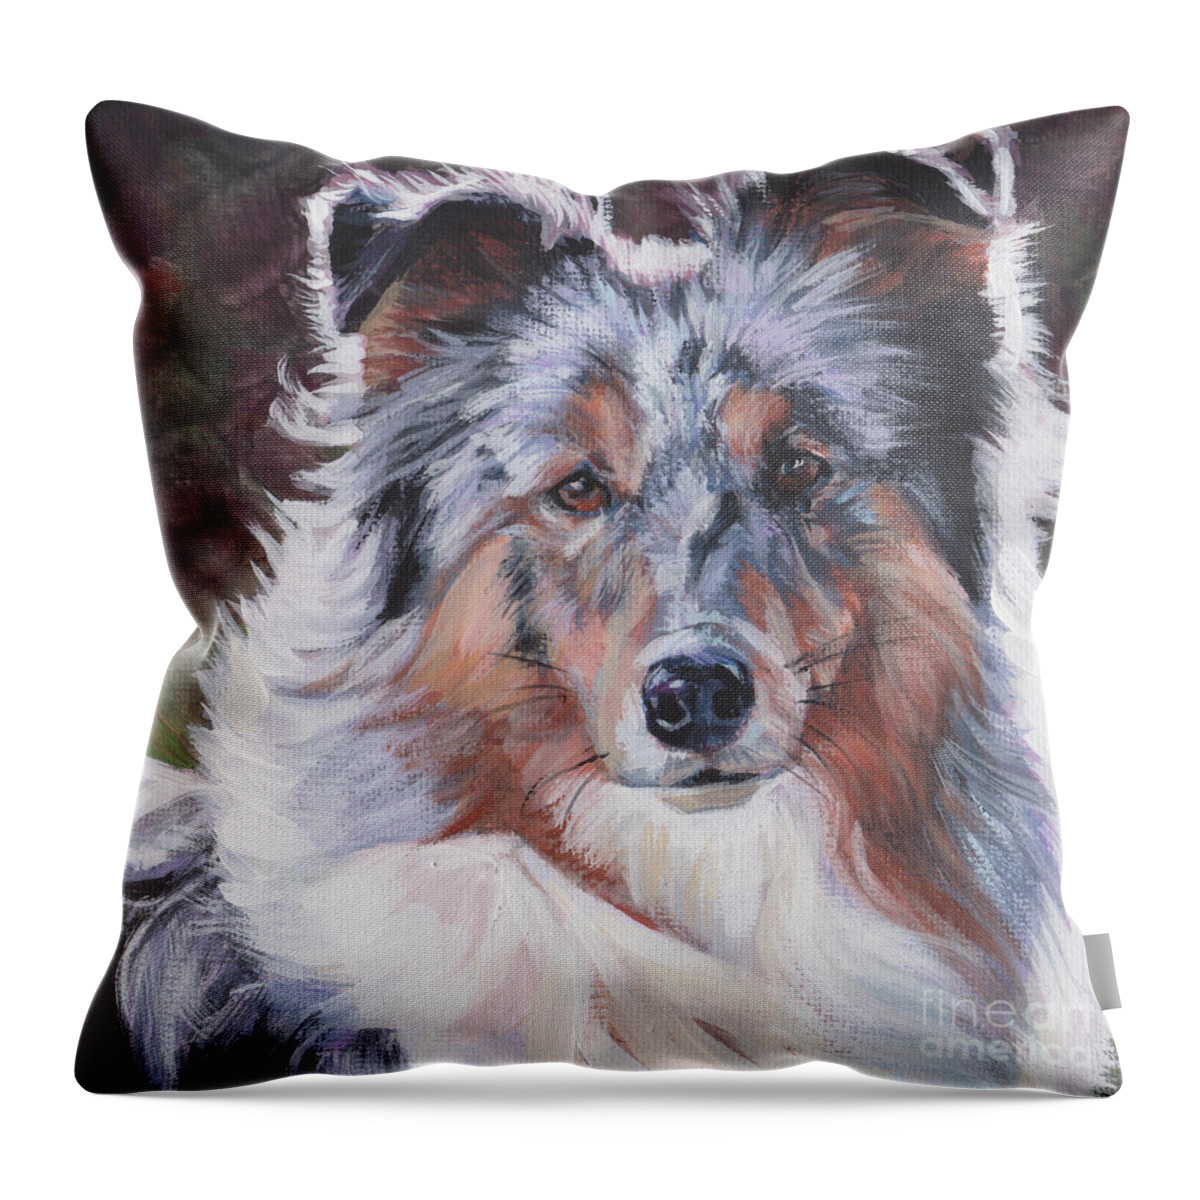 Blue Merle Sheltie Throw Pillow featuring the painting Blue Merle Sheltie by Lee Ann Shepard